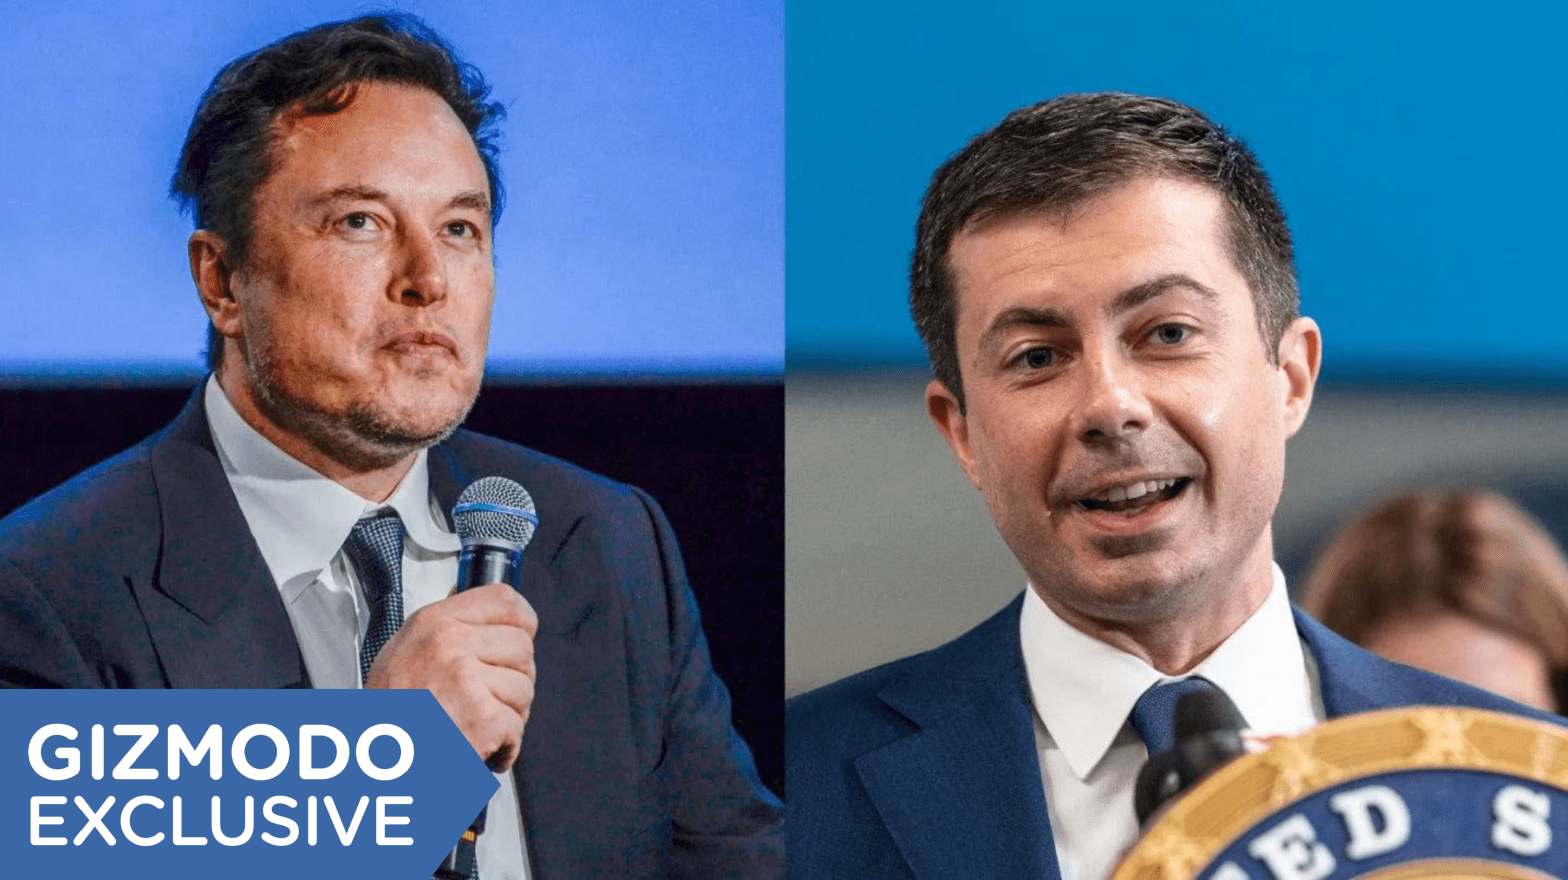 Elon Musk (L) and Pete Buttigieg don't see eye to eye on the future of high-speed transit. (Image: Getty Images / Shutterstock / Gizmodo)